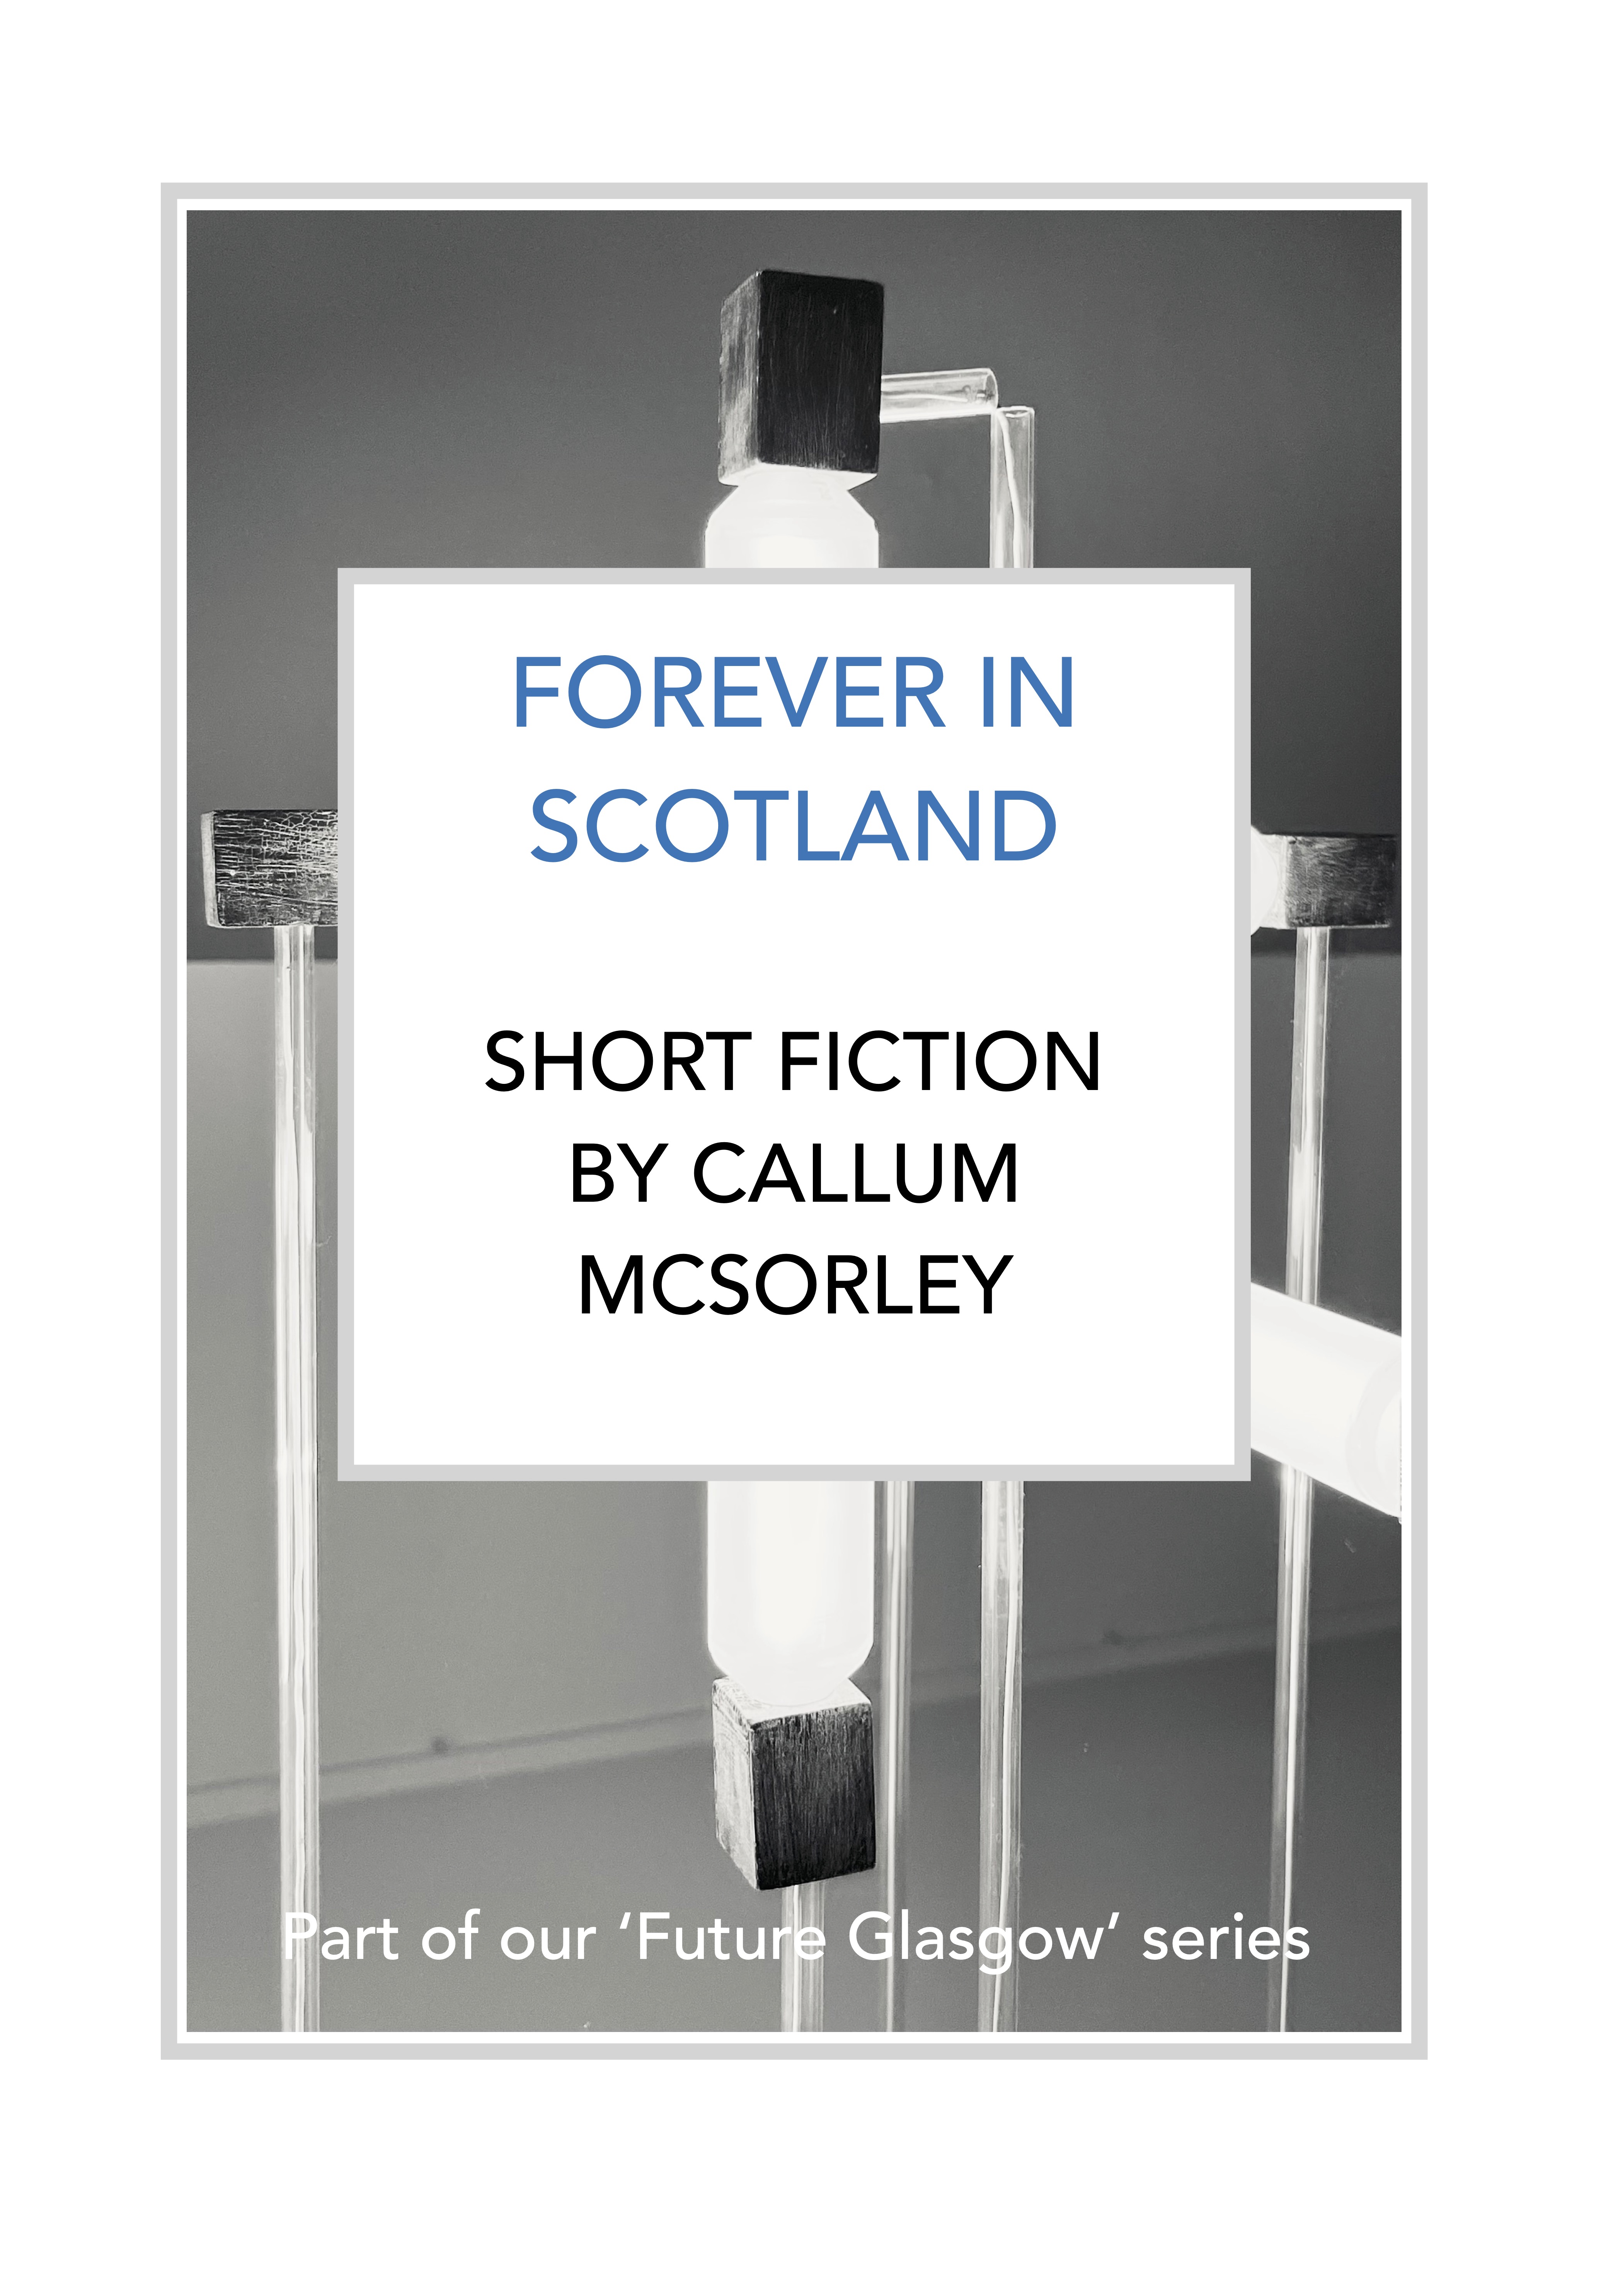 FUTURE GLASGOW: Forever in Scotland by Callum McSorley